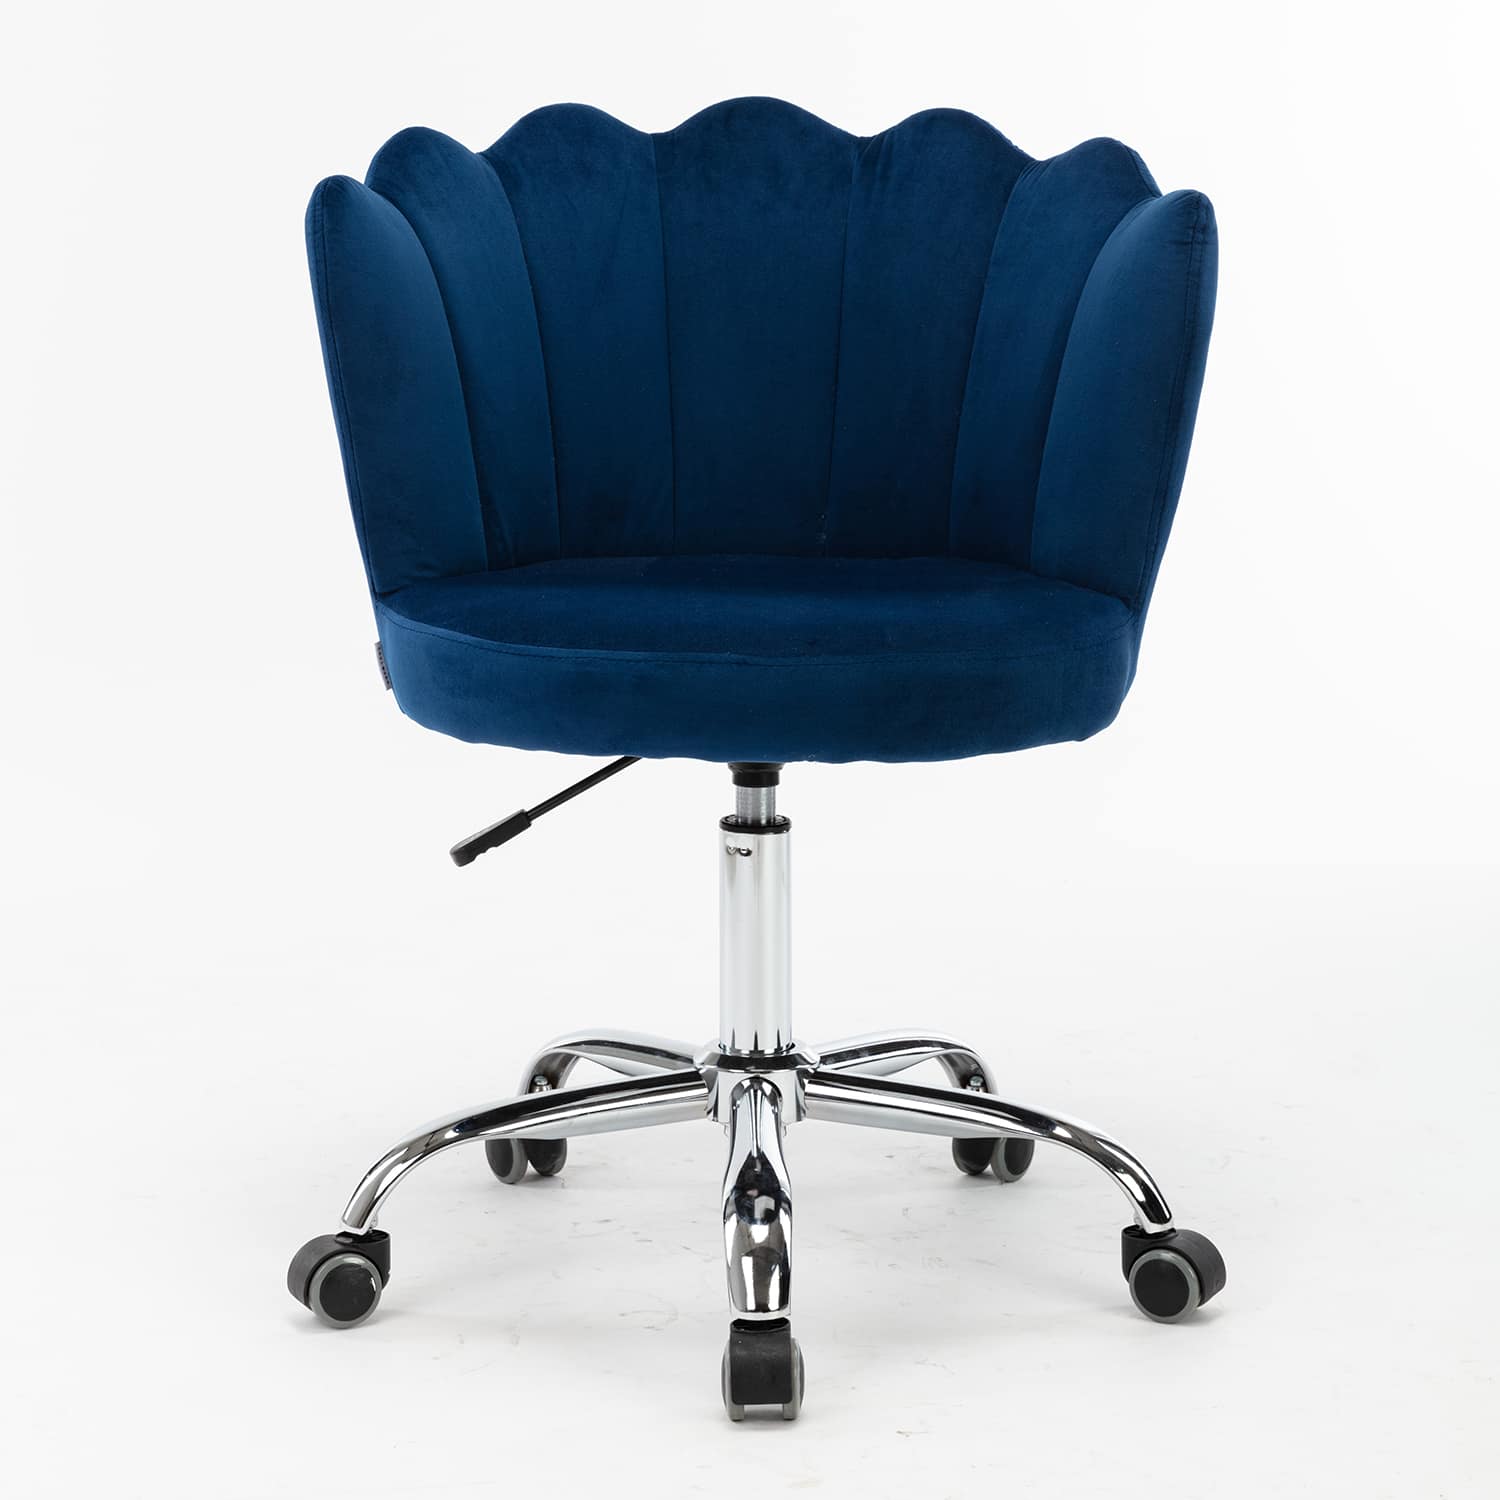 Swivel Shell Chair for Living Room/Bed Room, Modern Leisure office Chair in Blue